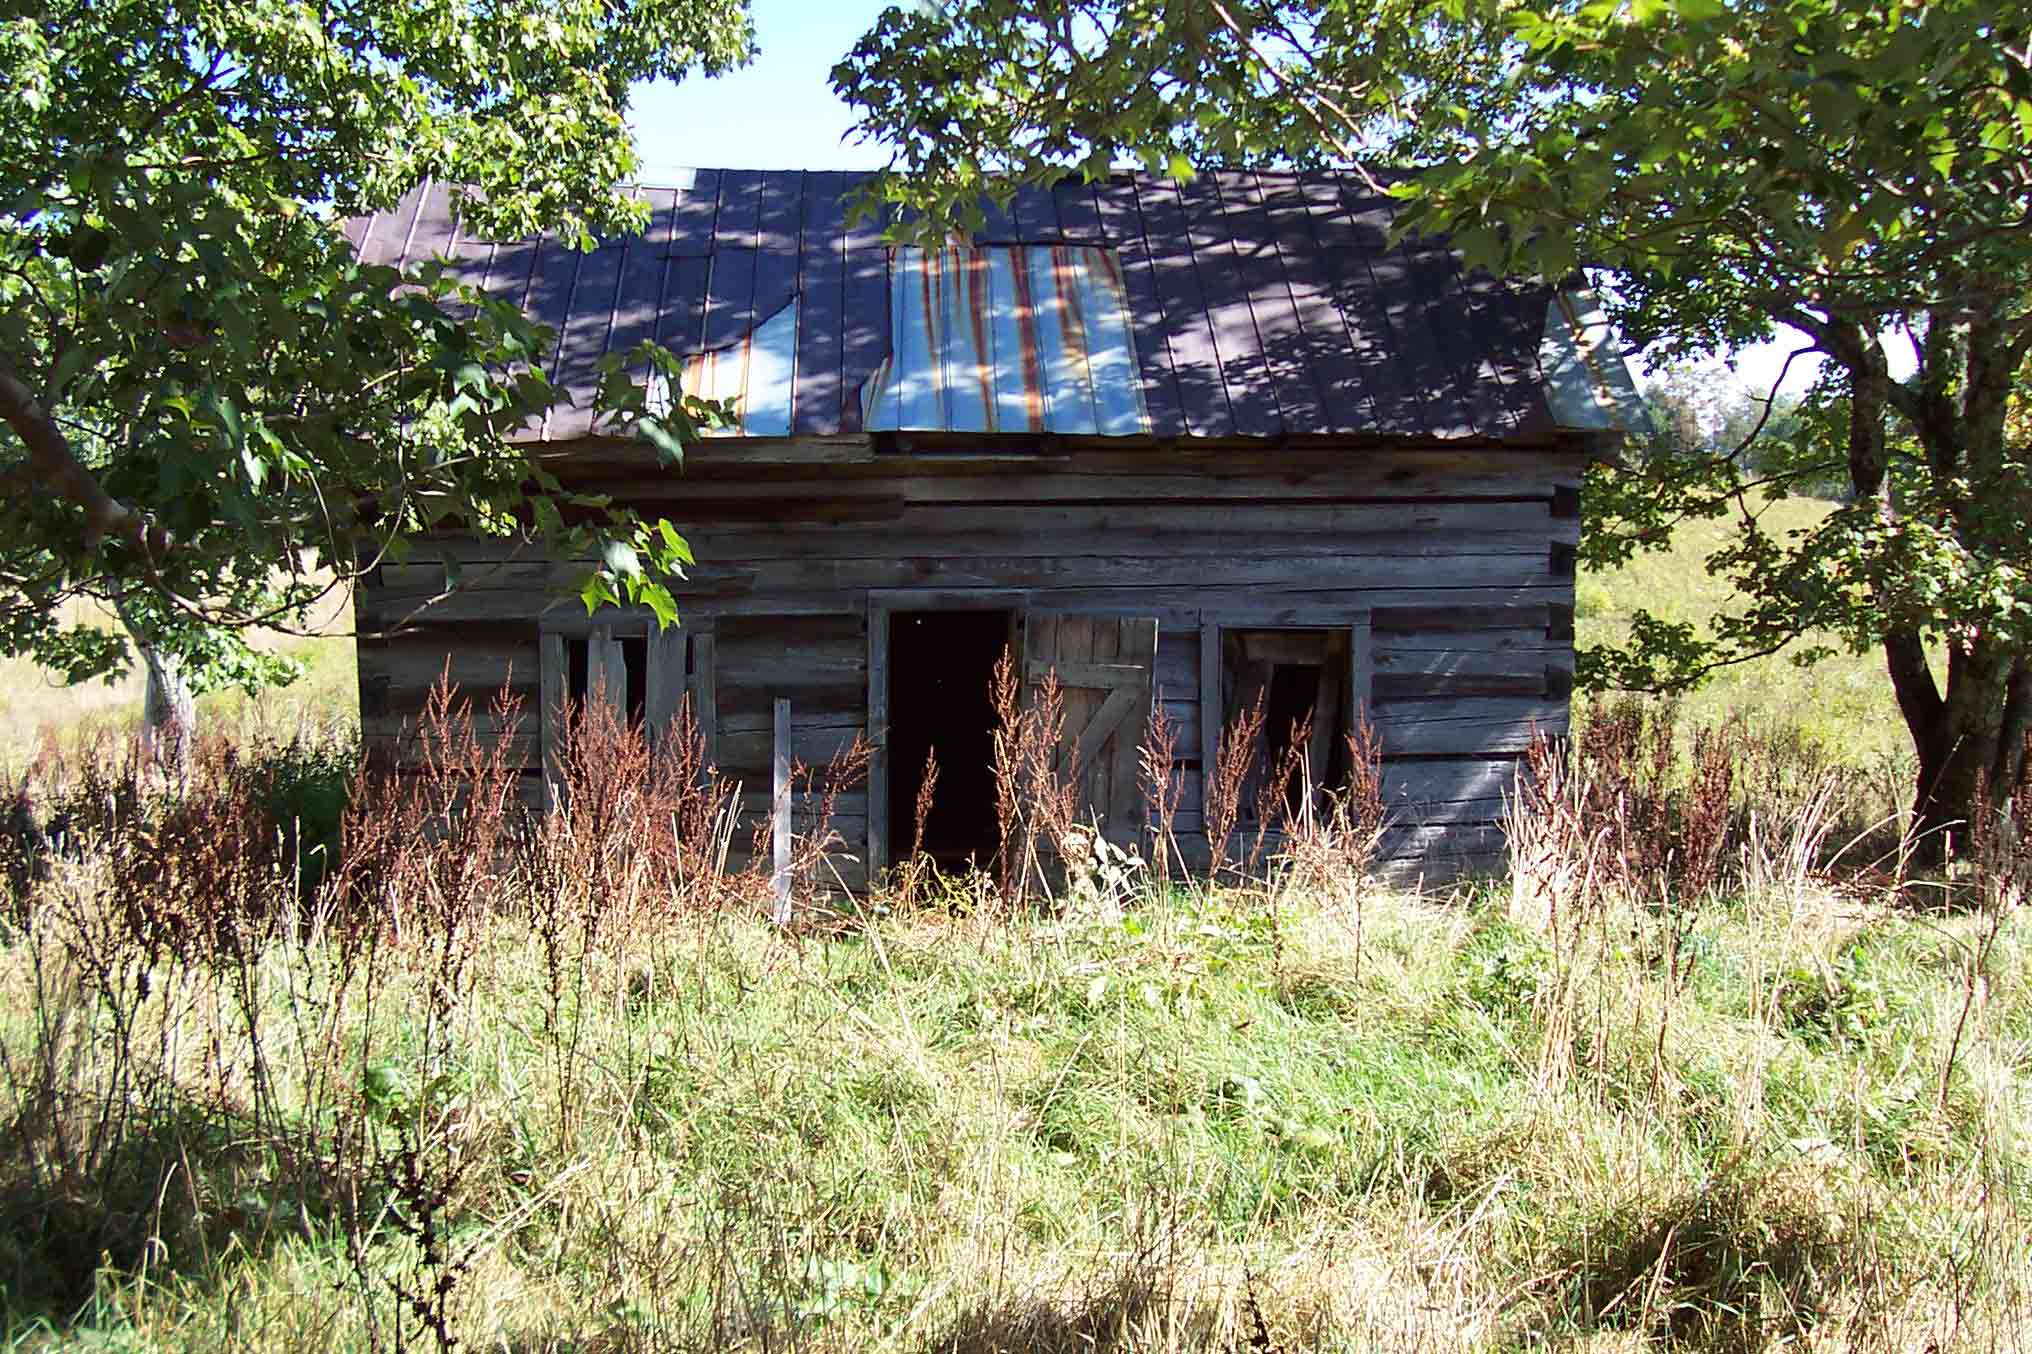 Old cabin near cranberry bog, 1 mile from TN 91 trail head (approx. MM 4.6).  Courtesy judyverlinhowell@hotmail.com